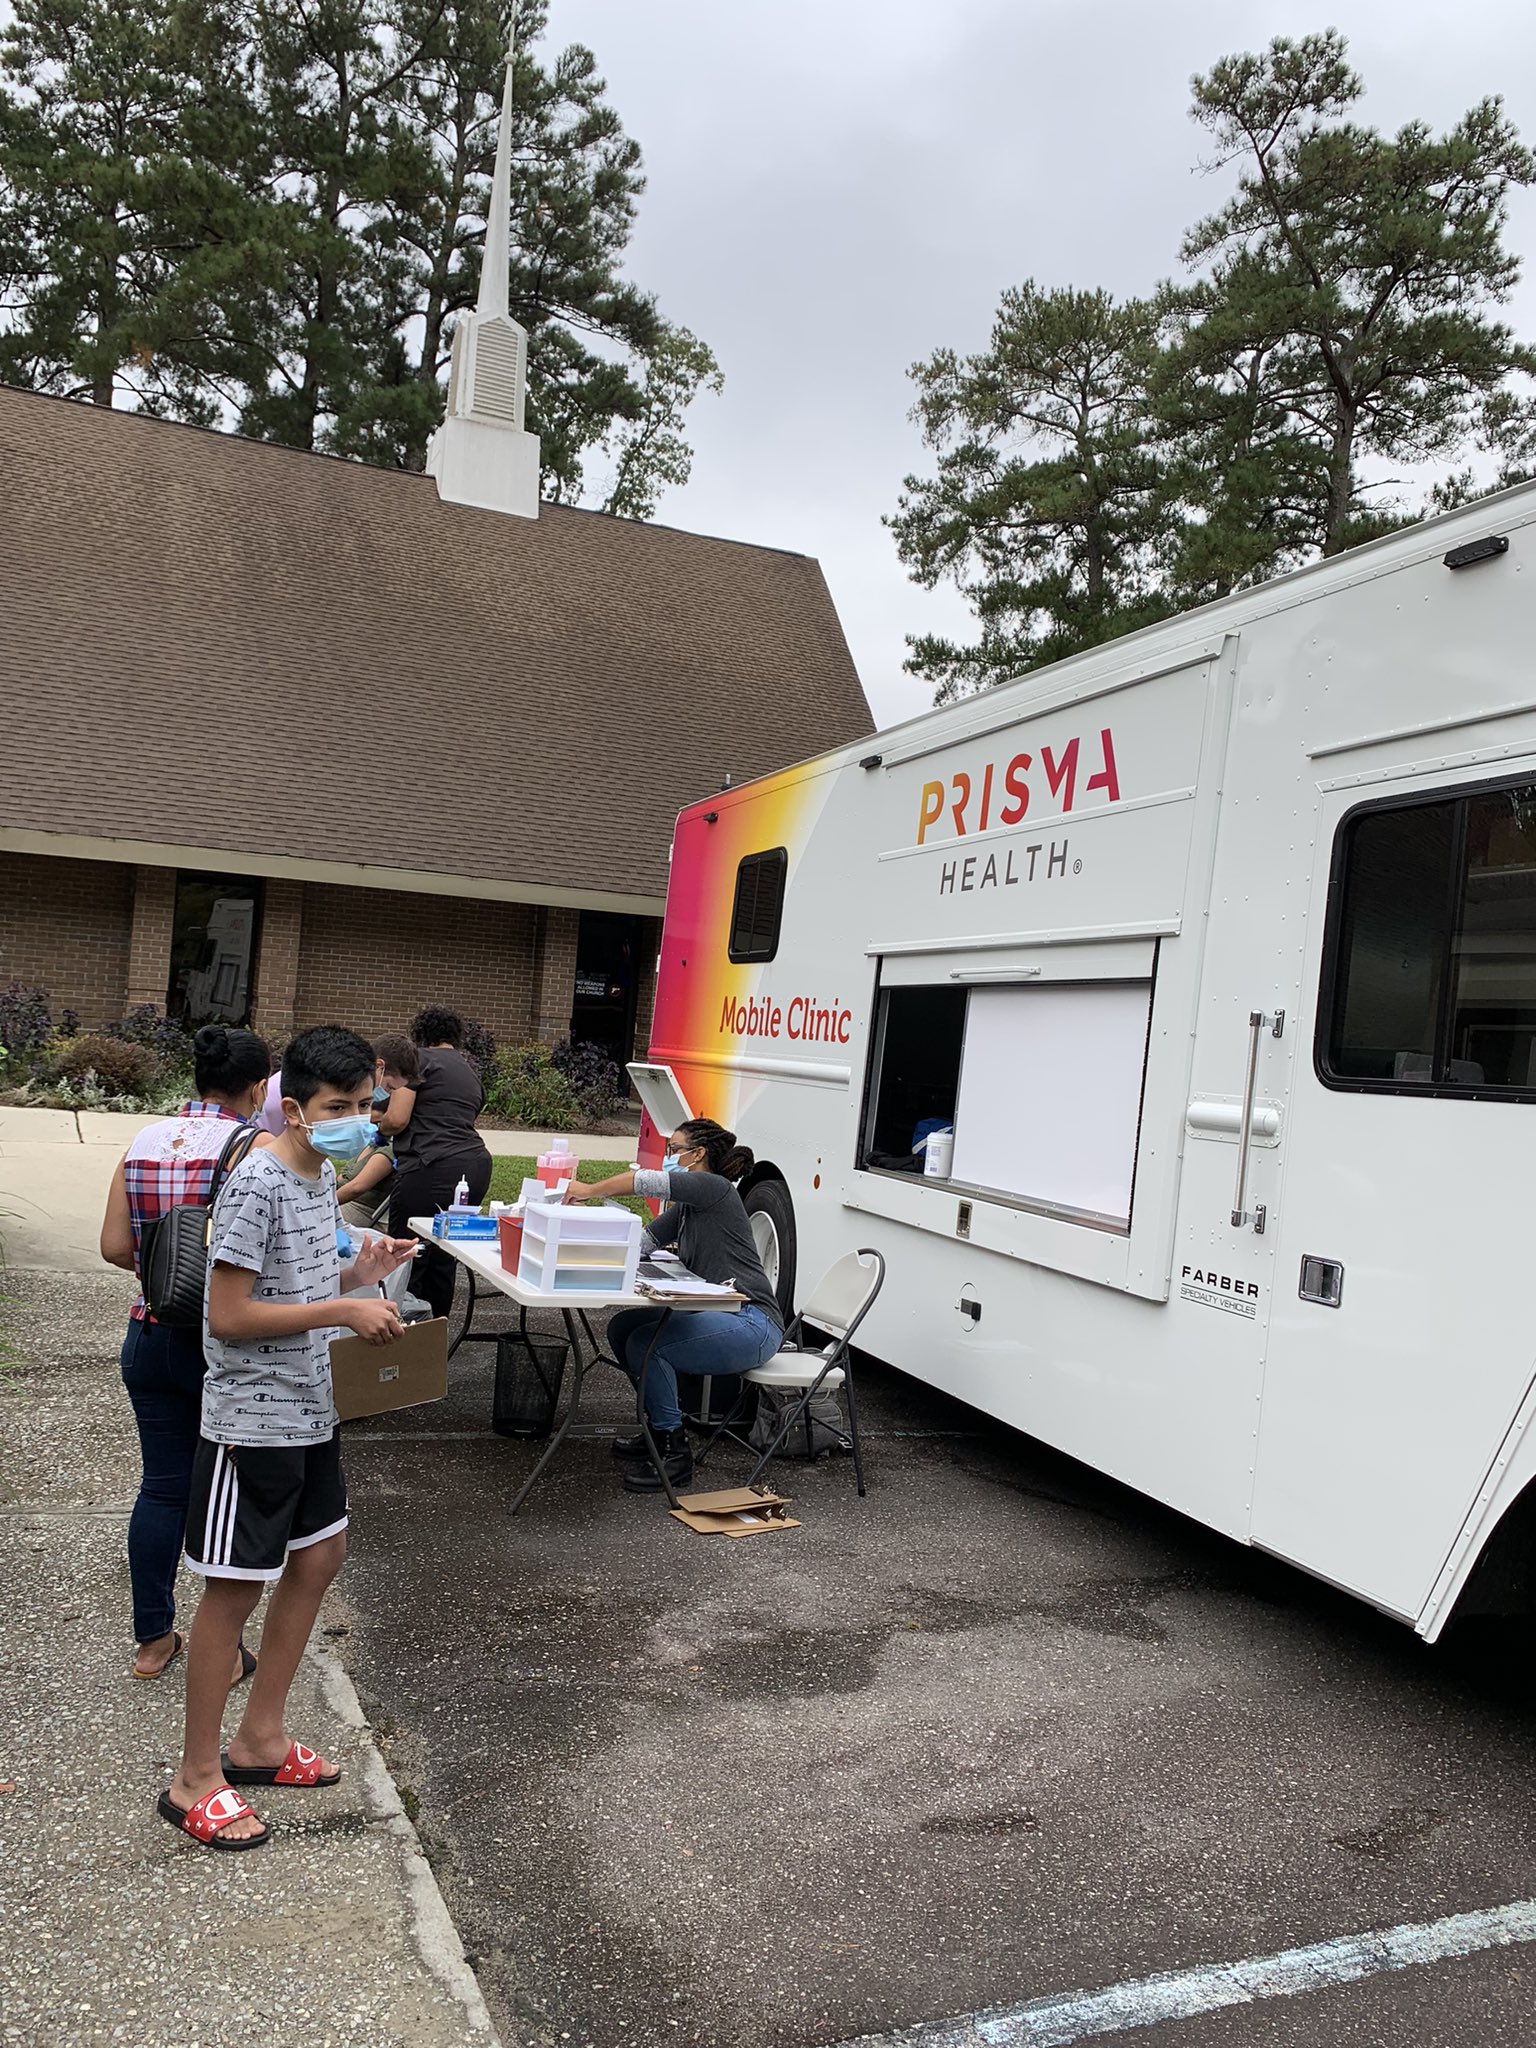 Maria Owens on X: Our partner @theprismahealth came through for us at the  last minute to hold a vaccine clinic for some R2 families this morning! We  are so thankful! @AbbyCobb15 @NellyJolly3 @